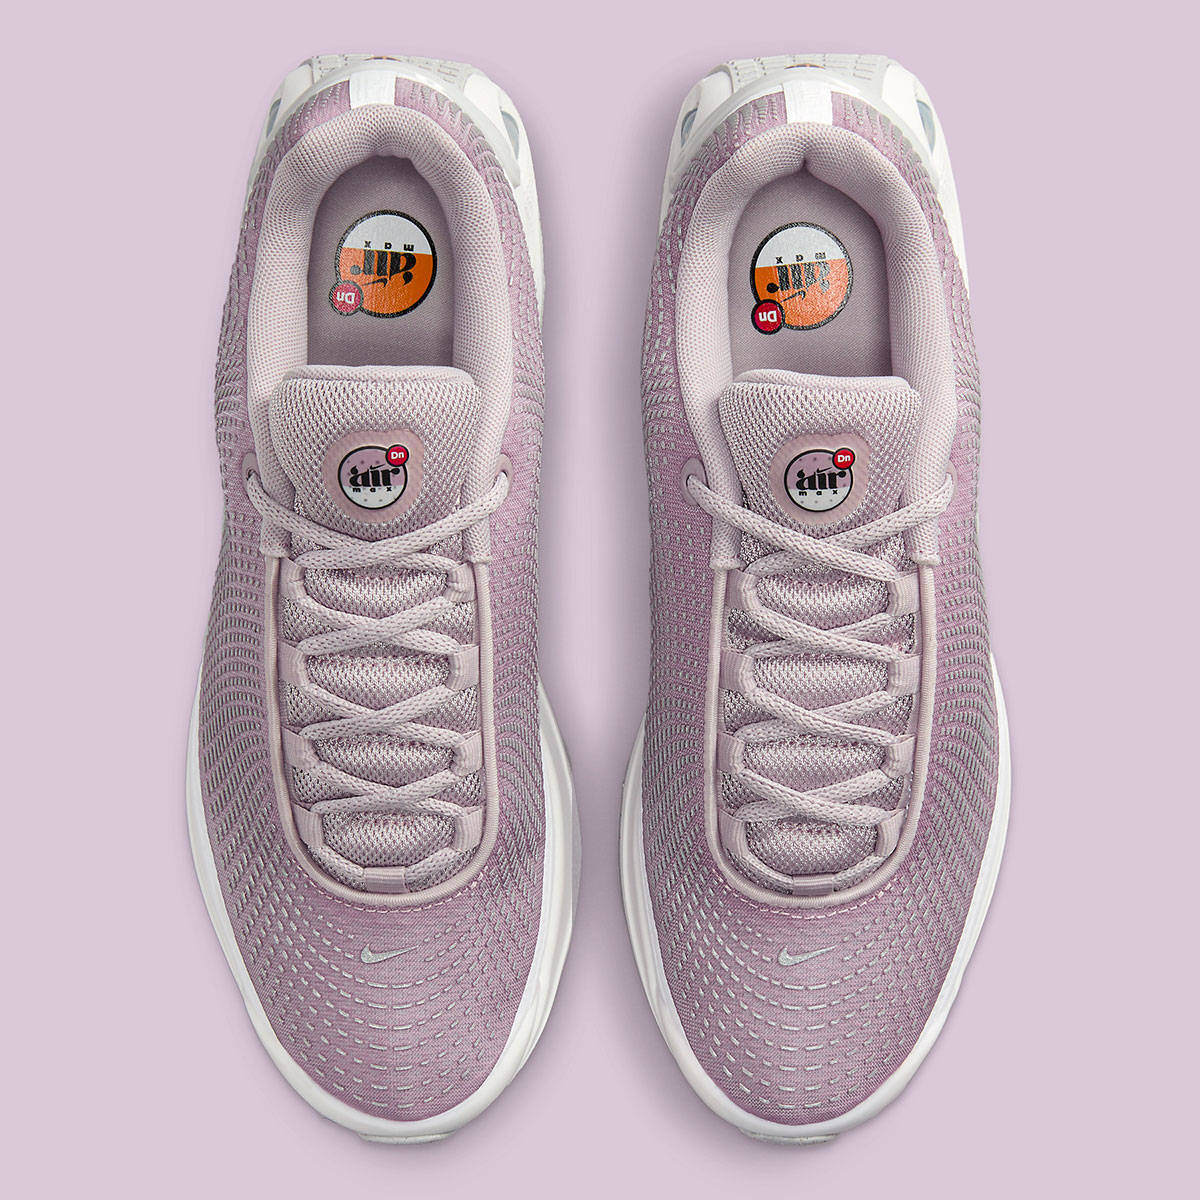 Nike The lovely ladies from Liberty London have been laying lavish patterns on some of Nike's most 90 Kadın Mavi Sneaker White Platinum Violet Fj3145 004 Release Date 1